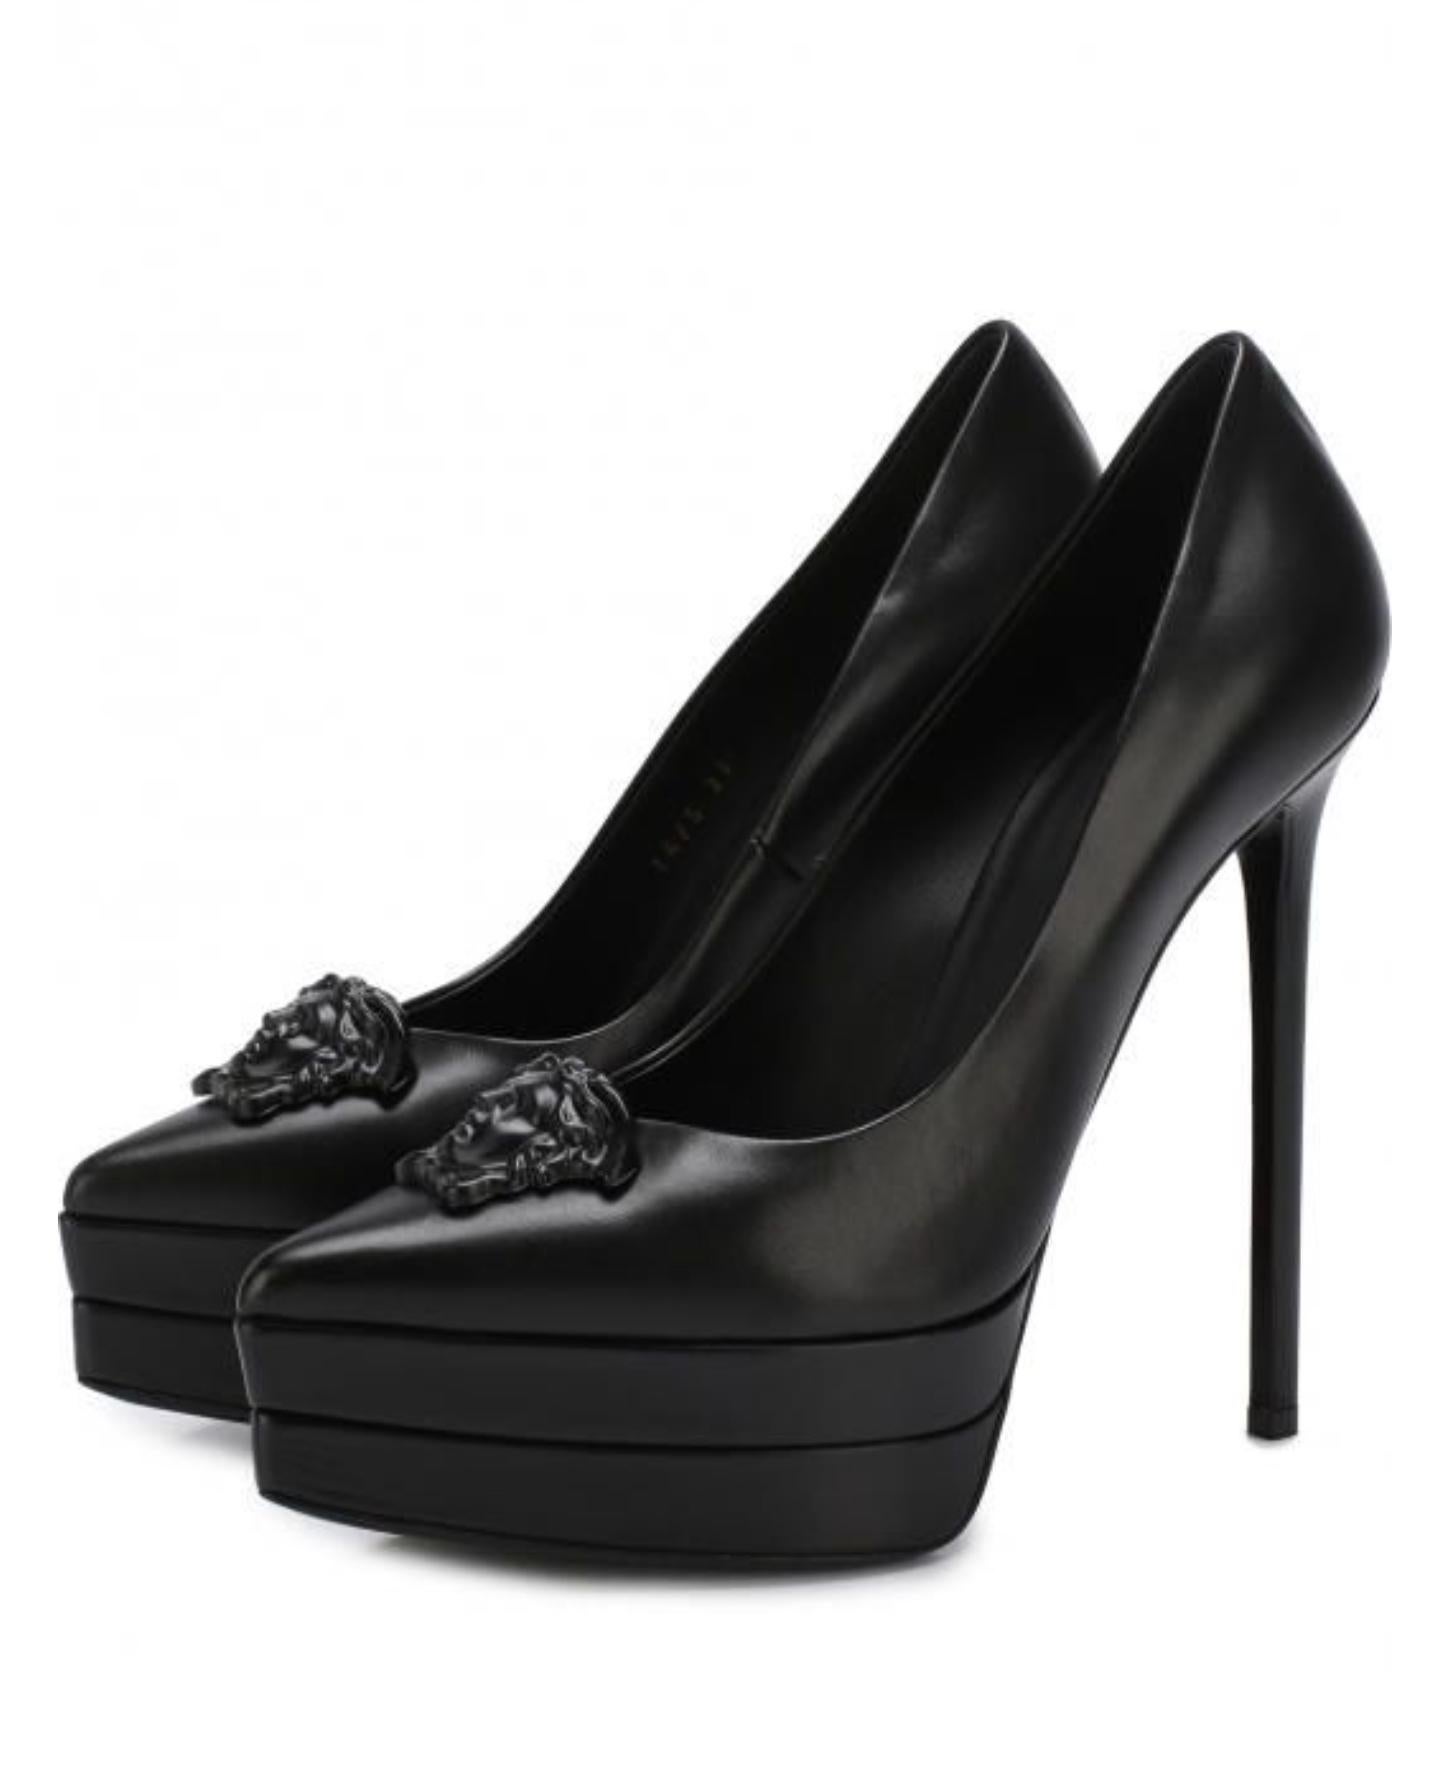 Versace Black Leather with Black Medusa Head Palazzo Platform Pump

This classic Versace Palazzo pump is a showstopping must-have. Featuring black leather, a black medusa head embellishment, a triple platform, pointed toe, and a slim high heel.